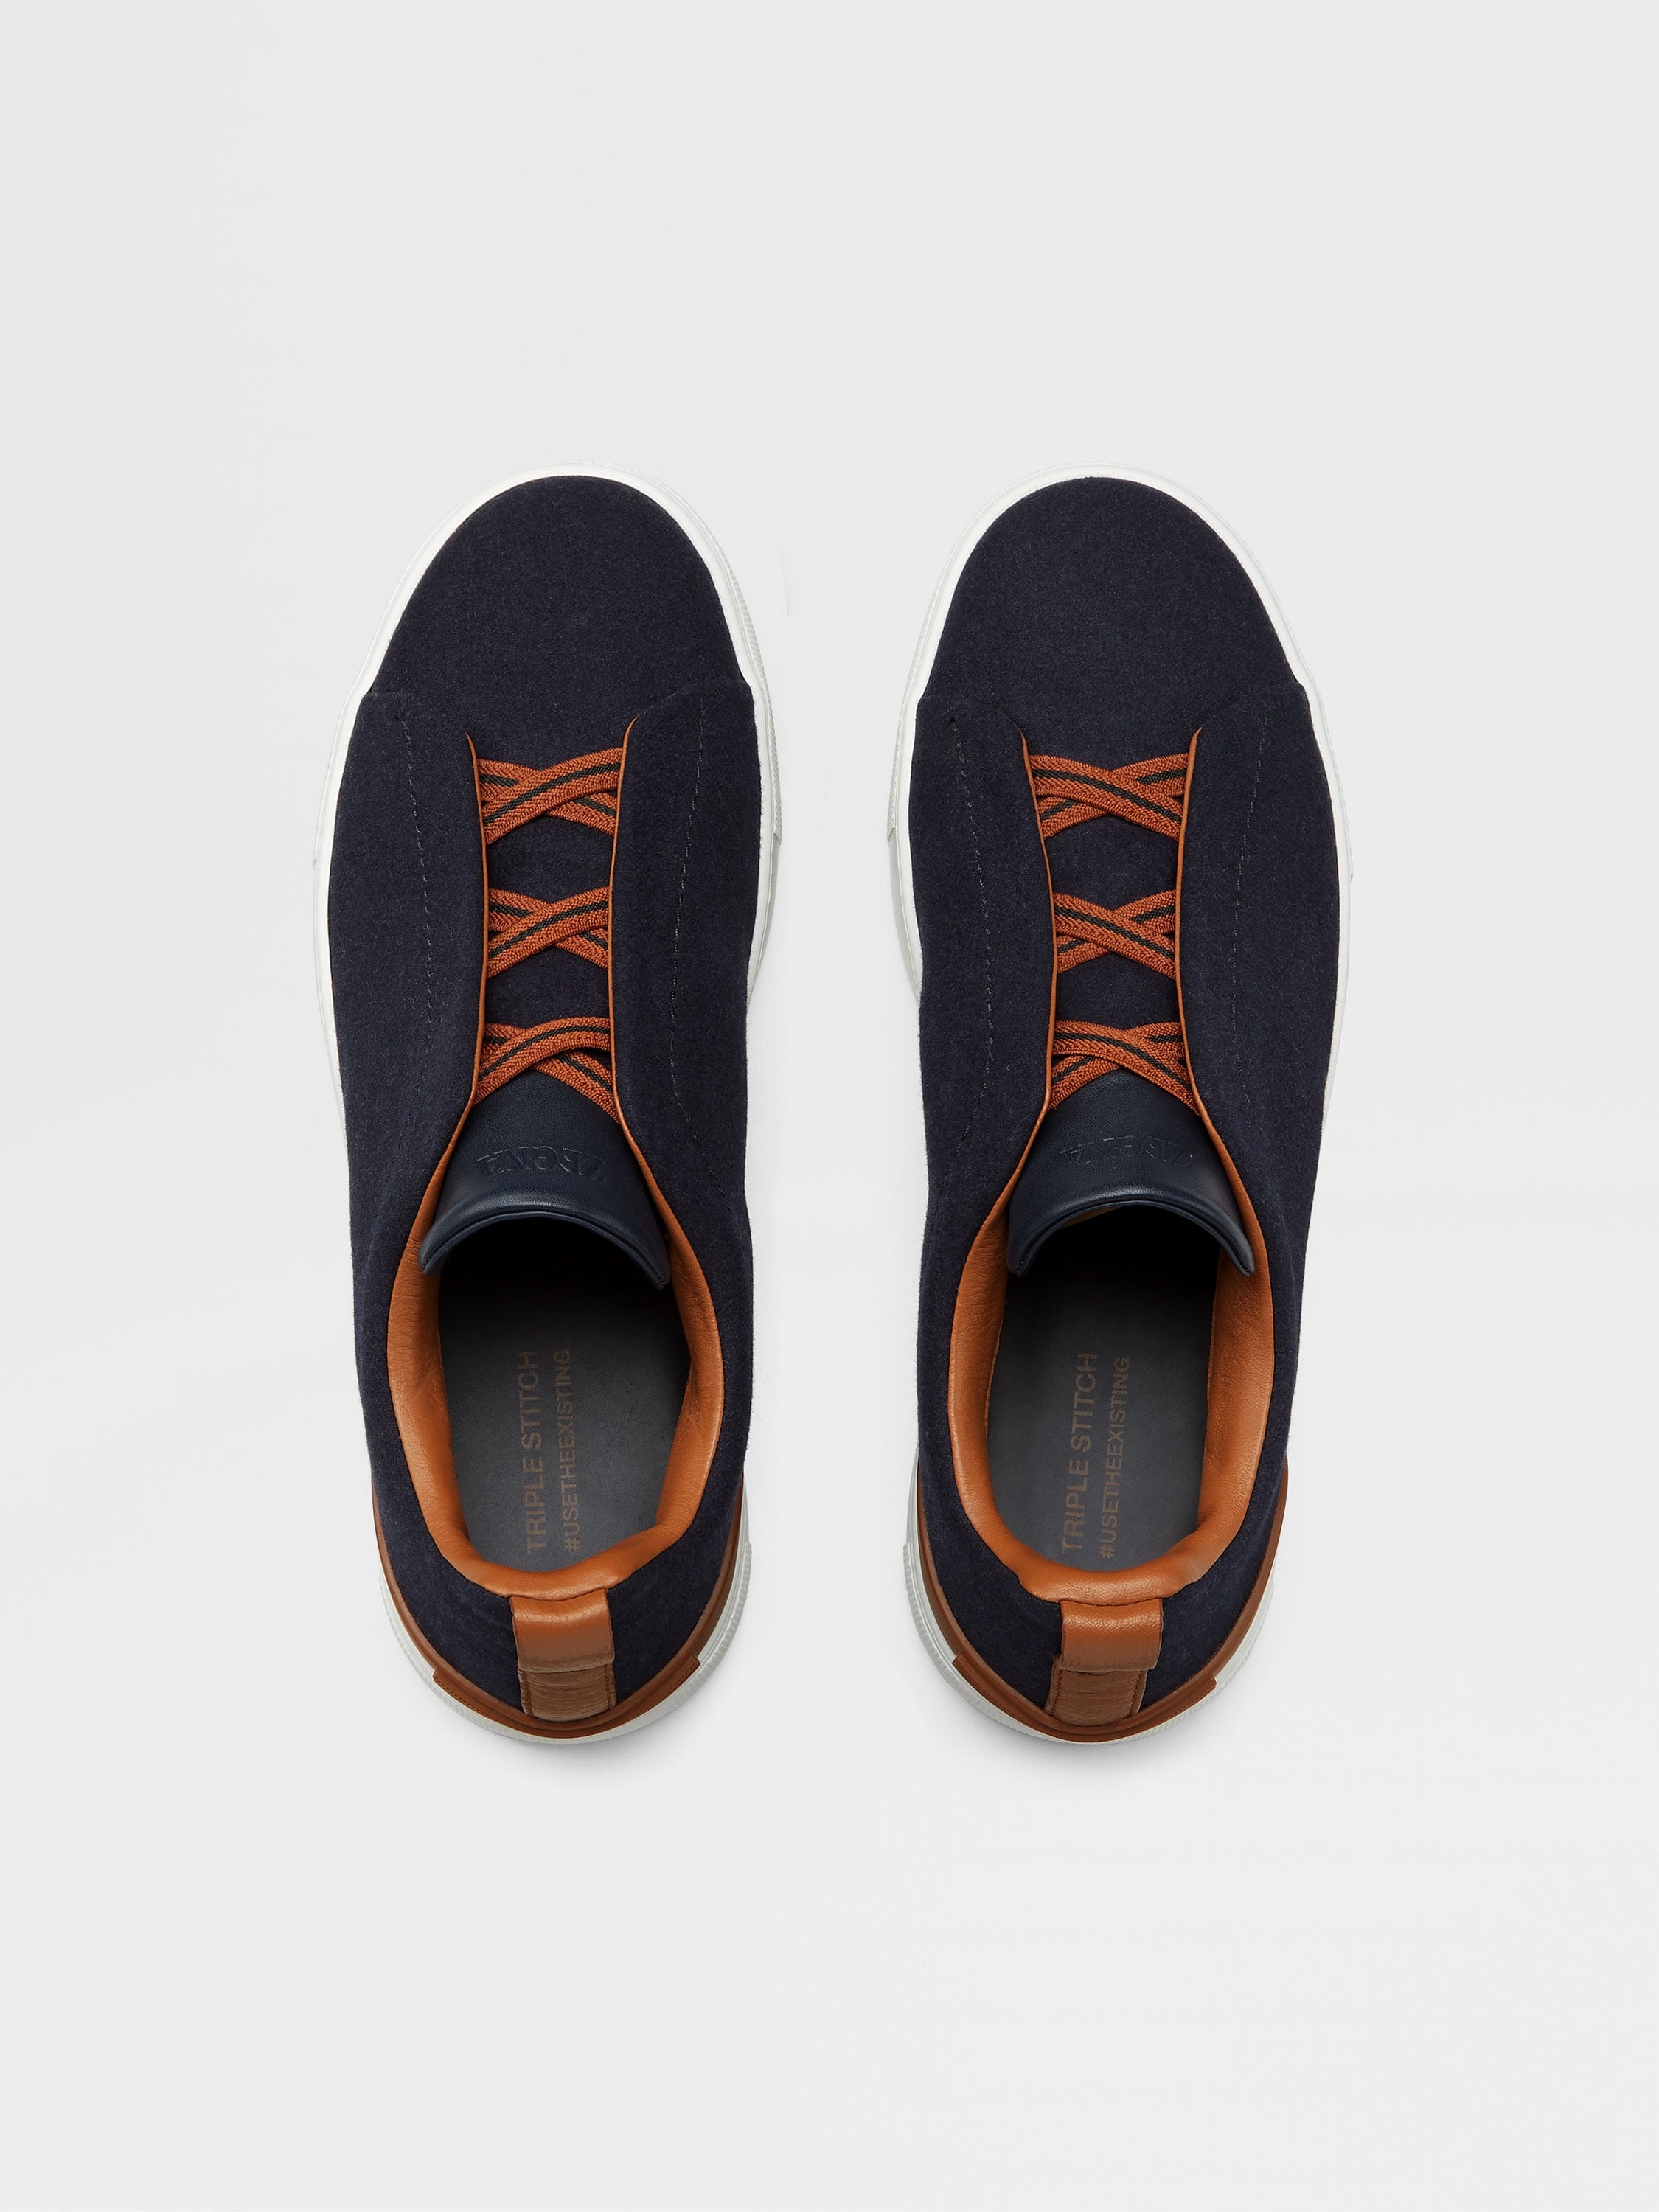 NAVY BLUE #USETHEEXISTING™ WOOL TRIPLE STITCH™ SNEAKERS - 3